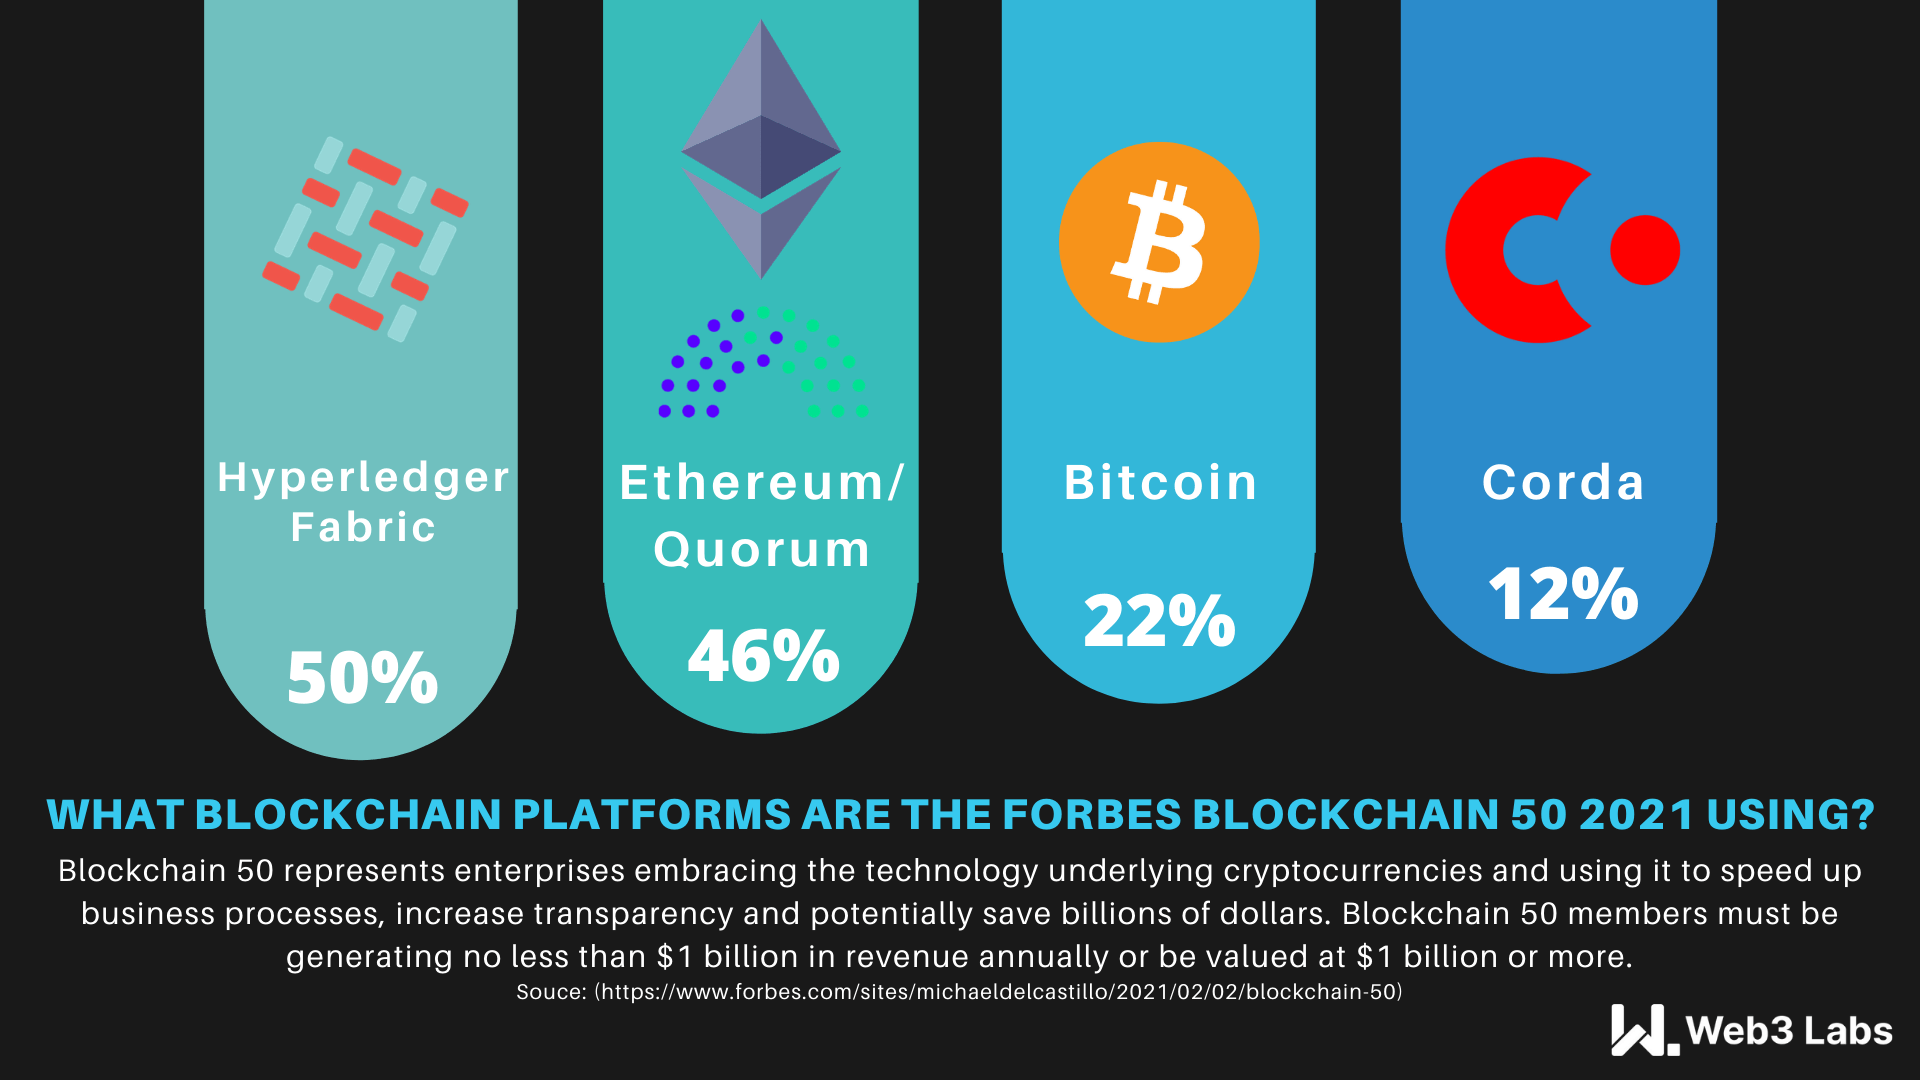 Forbes Blockchain 50 infographic 2021 